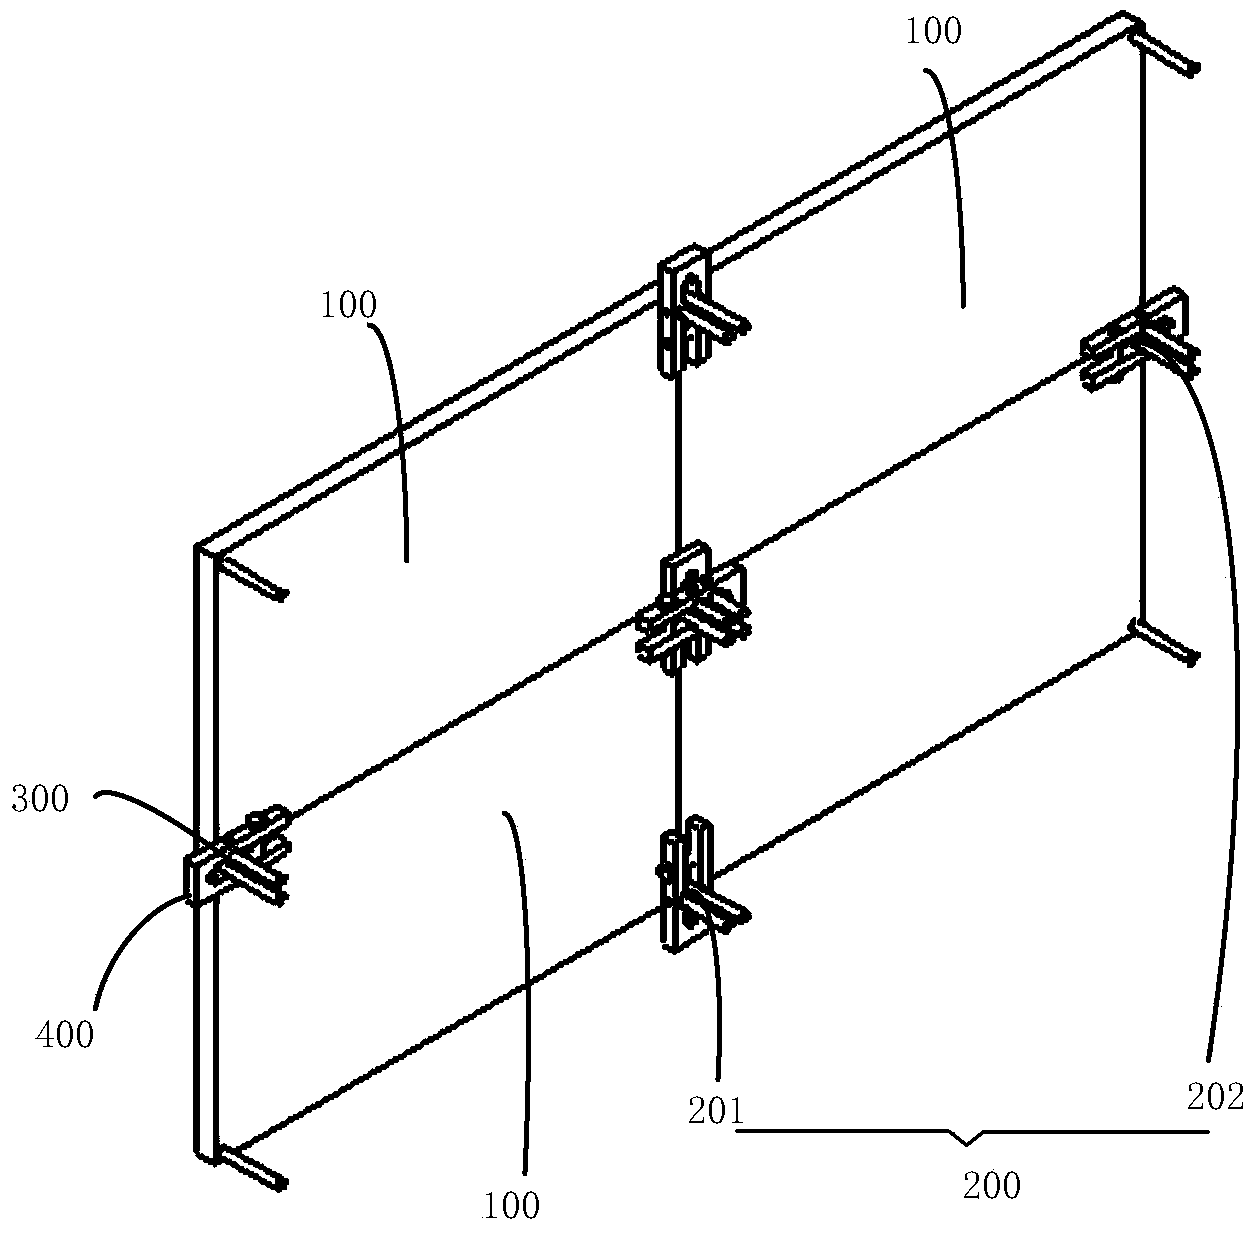 Spliced screen and display device